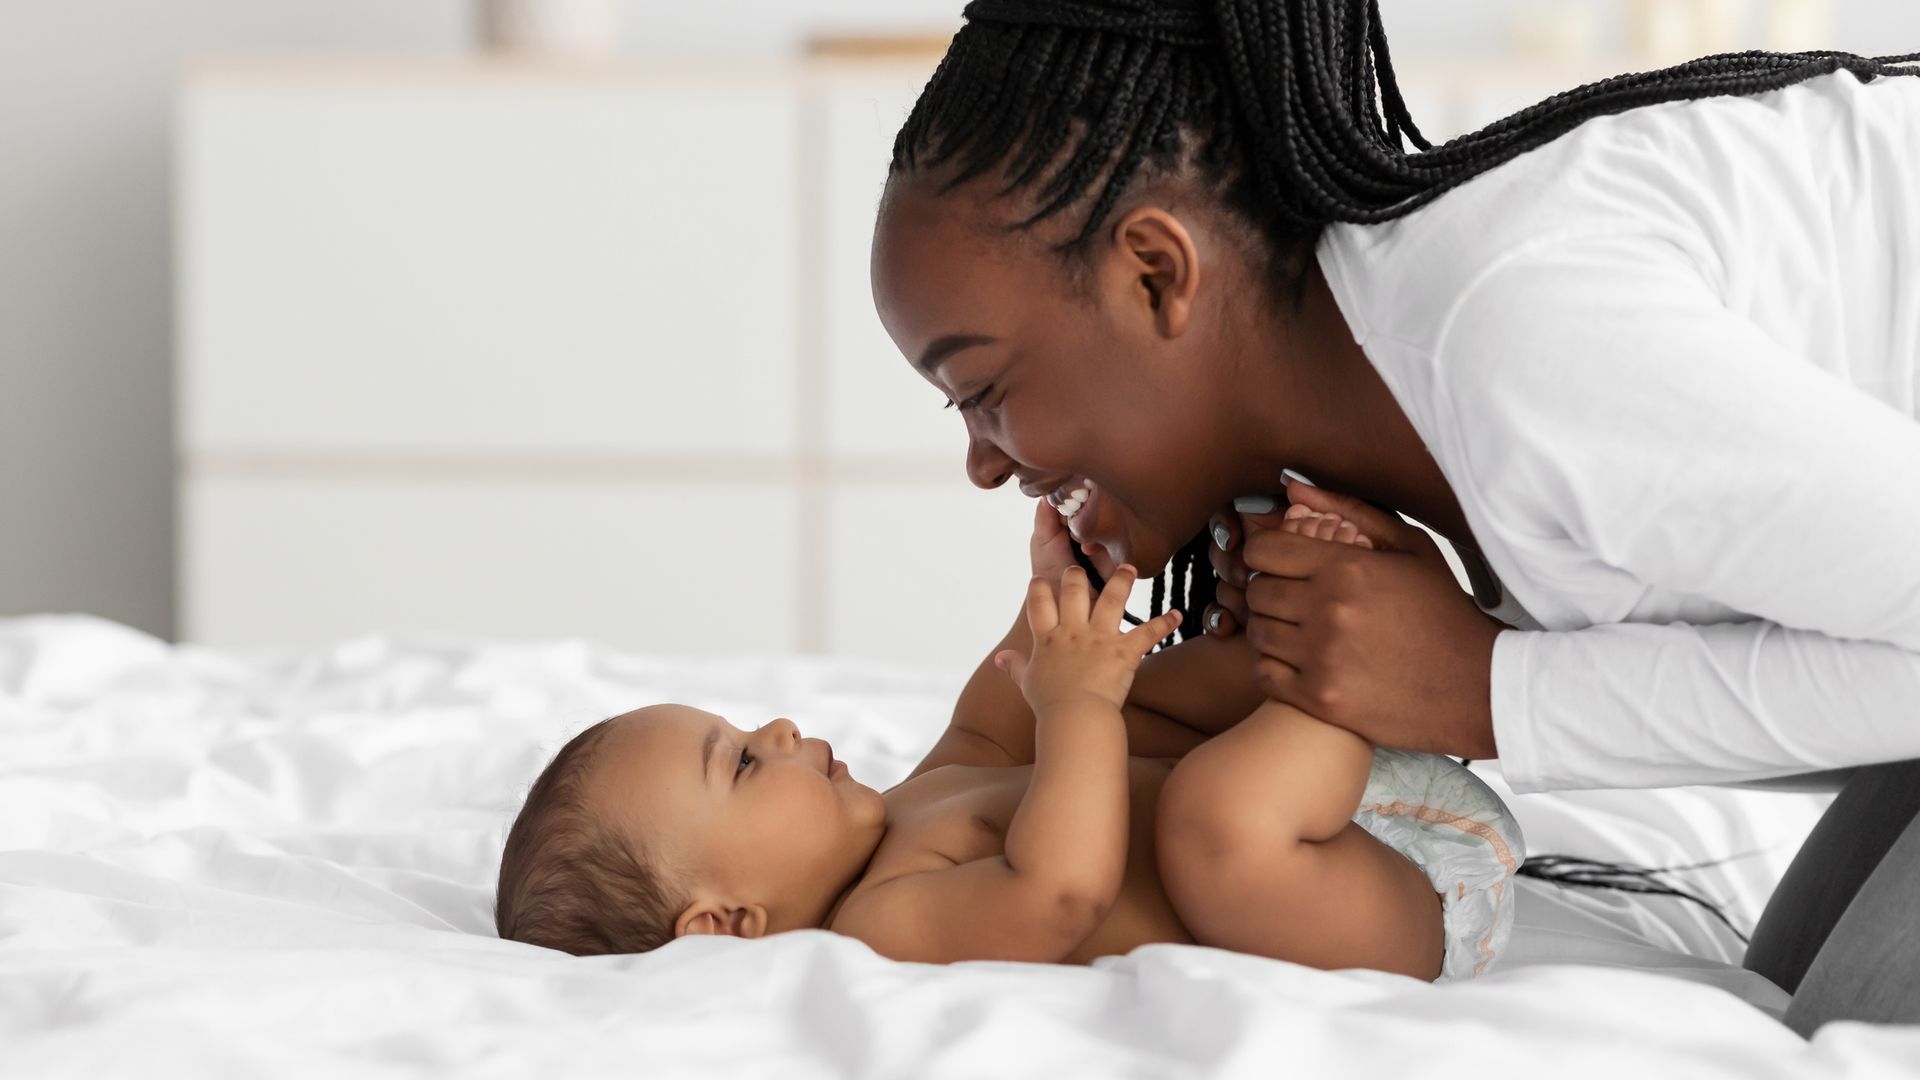 A woman is playing with her baby on a bed.